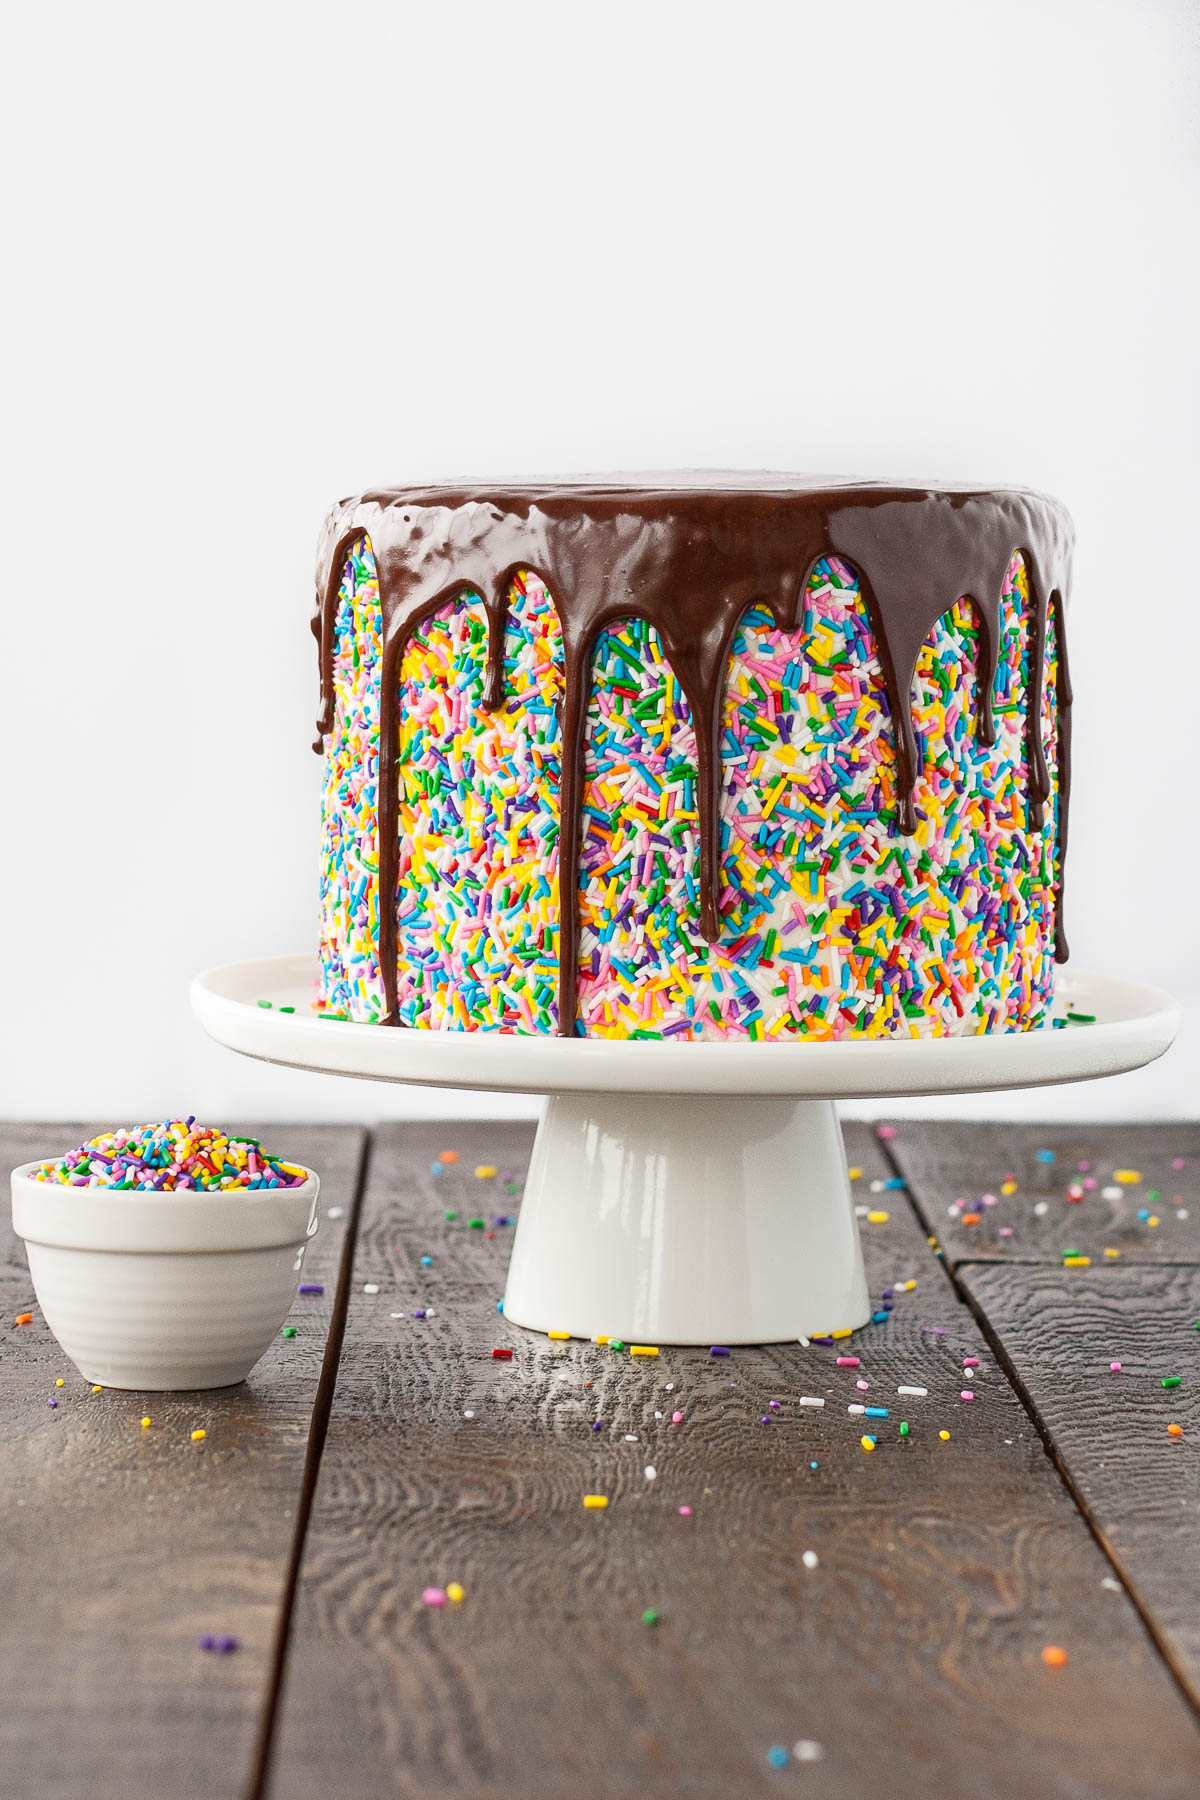 Funfetti cake with a chocolate ganache drip on a white cake stand. A bowl of sprinkles to the side.